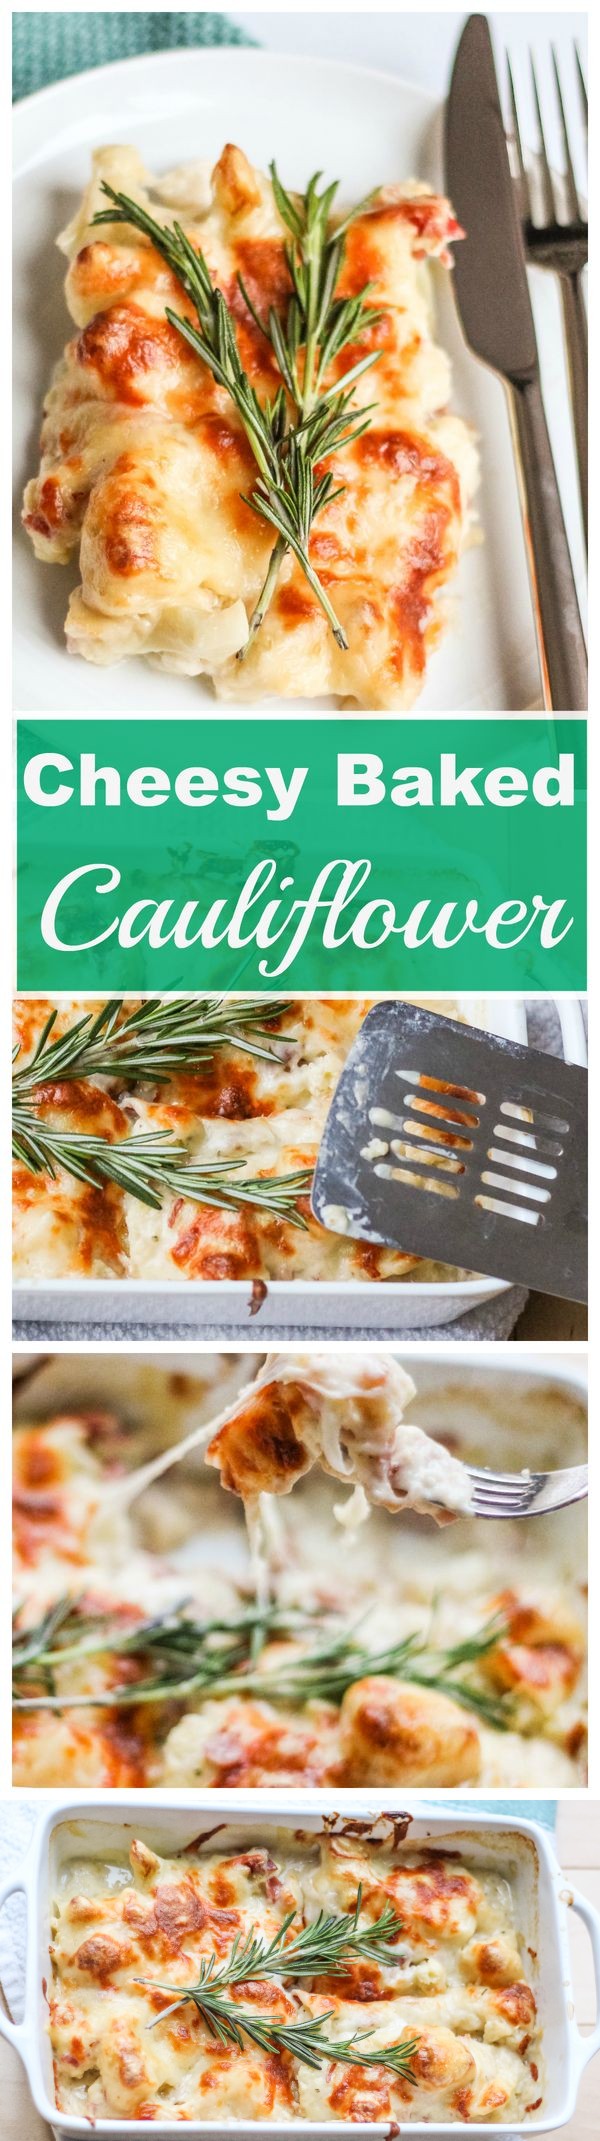 Cheesy Baked Cauliflower with Prosciutto